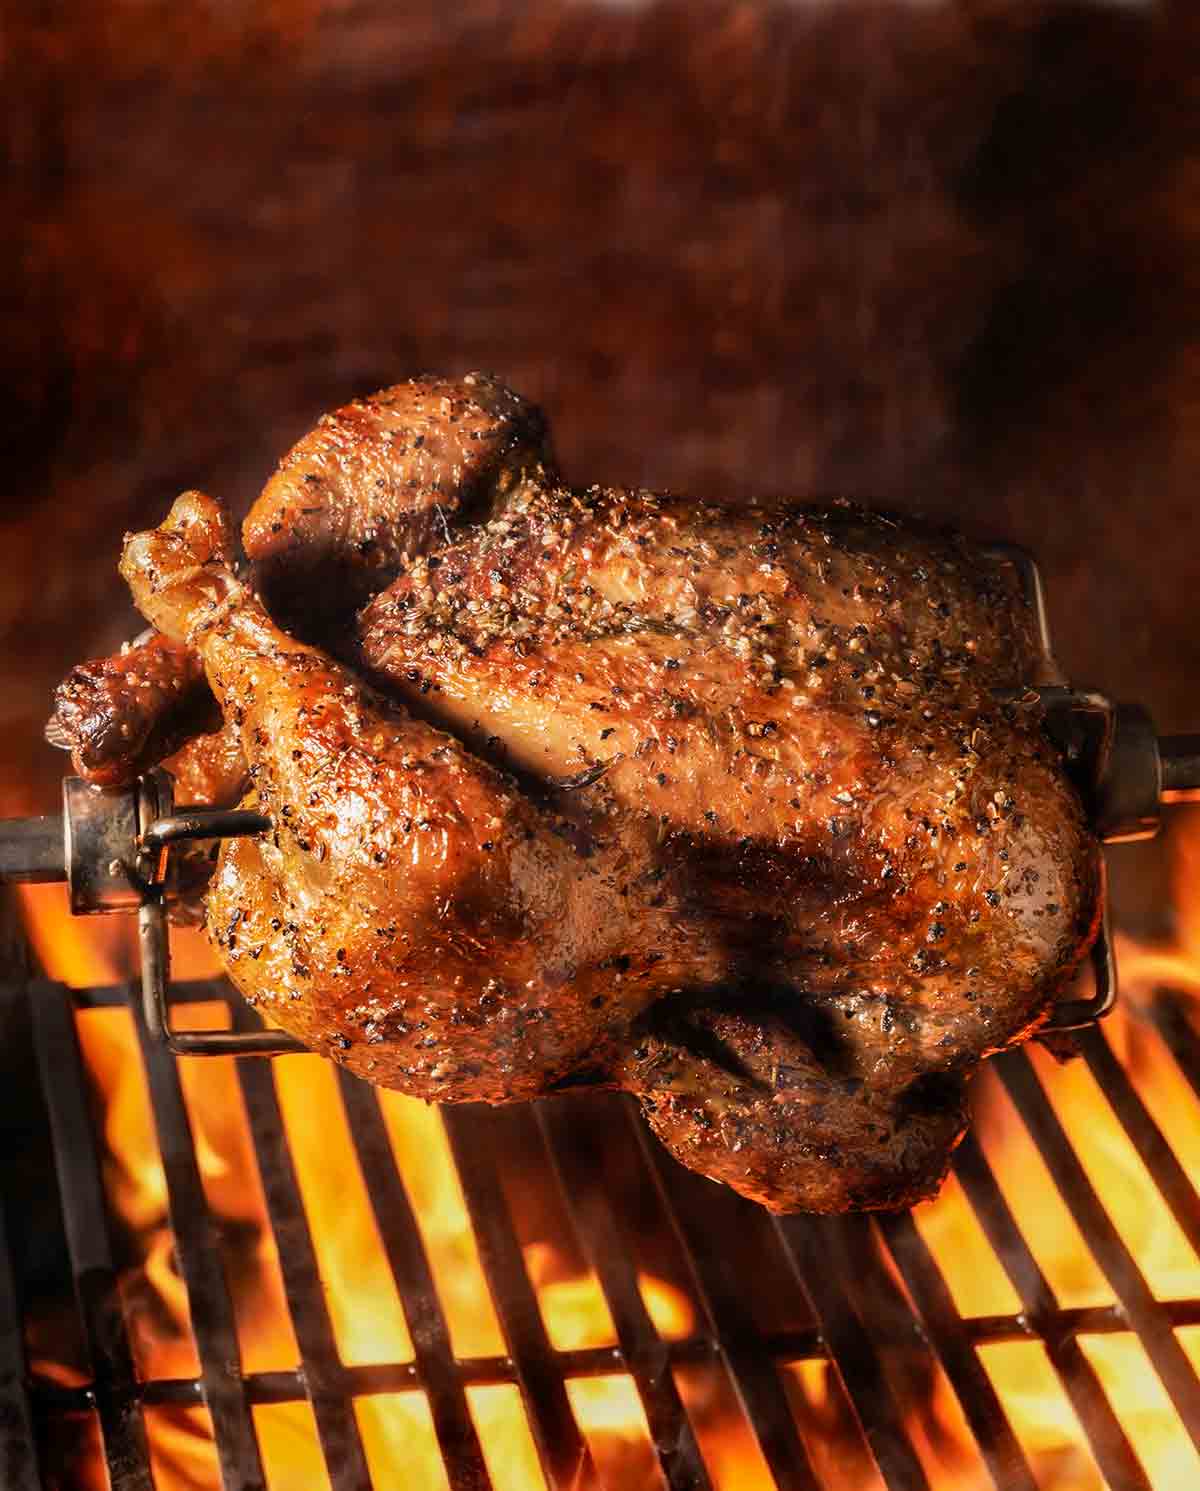 A rotisserie chicken suspended over a grill with flames below.